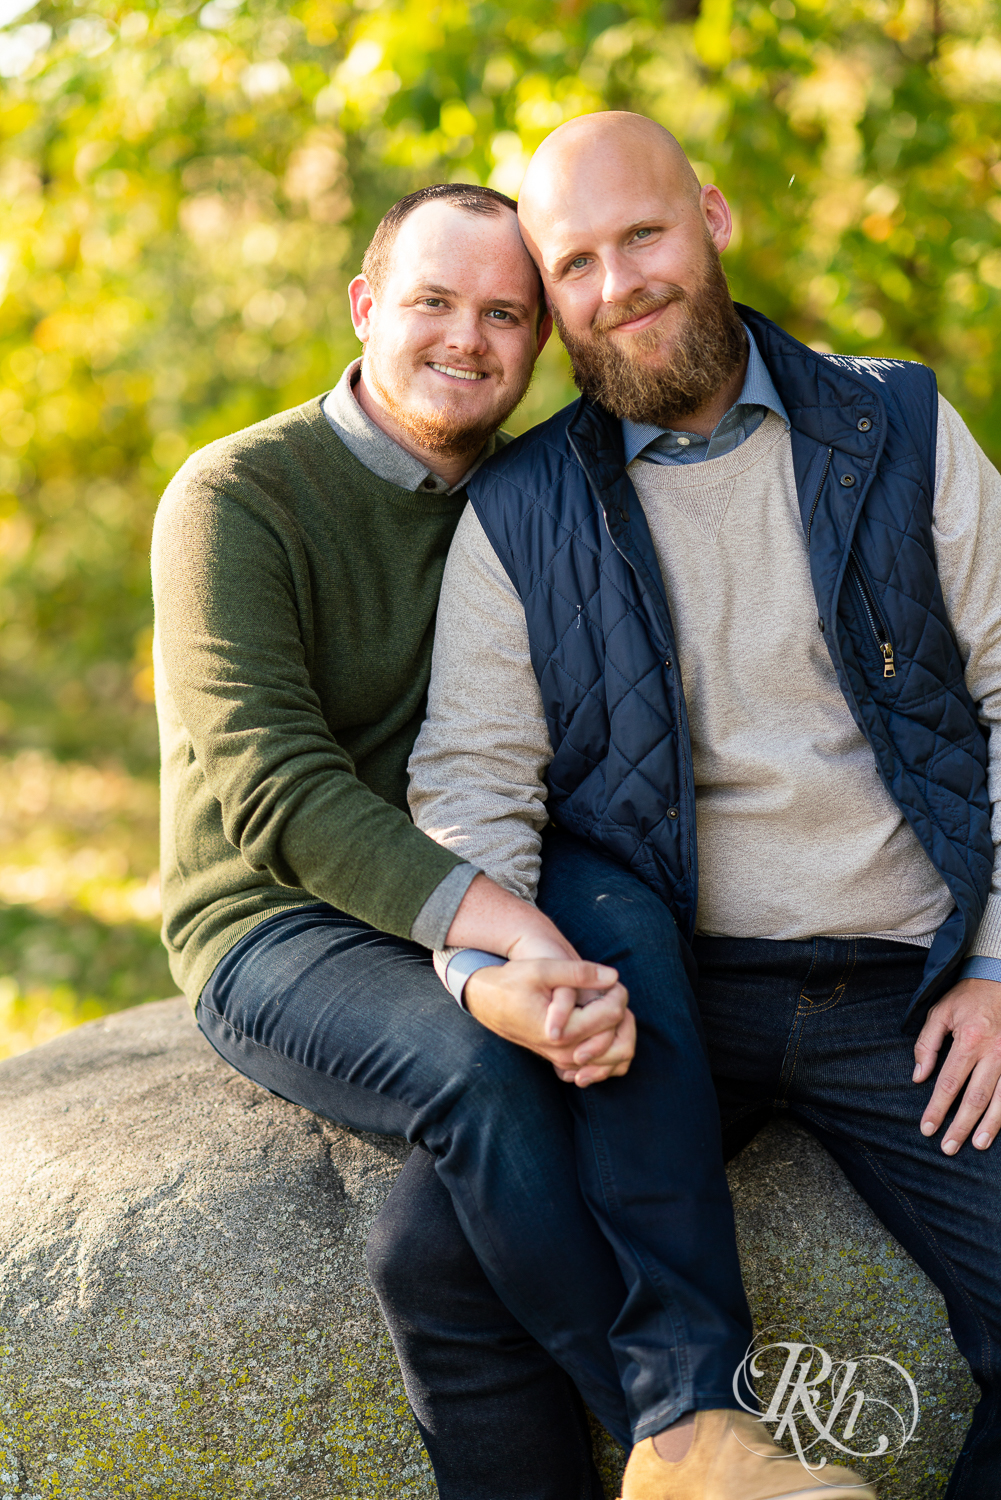 Two gay men holding hands and smiling in Belle Plaine, Minnesota.